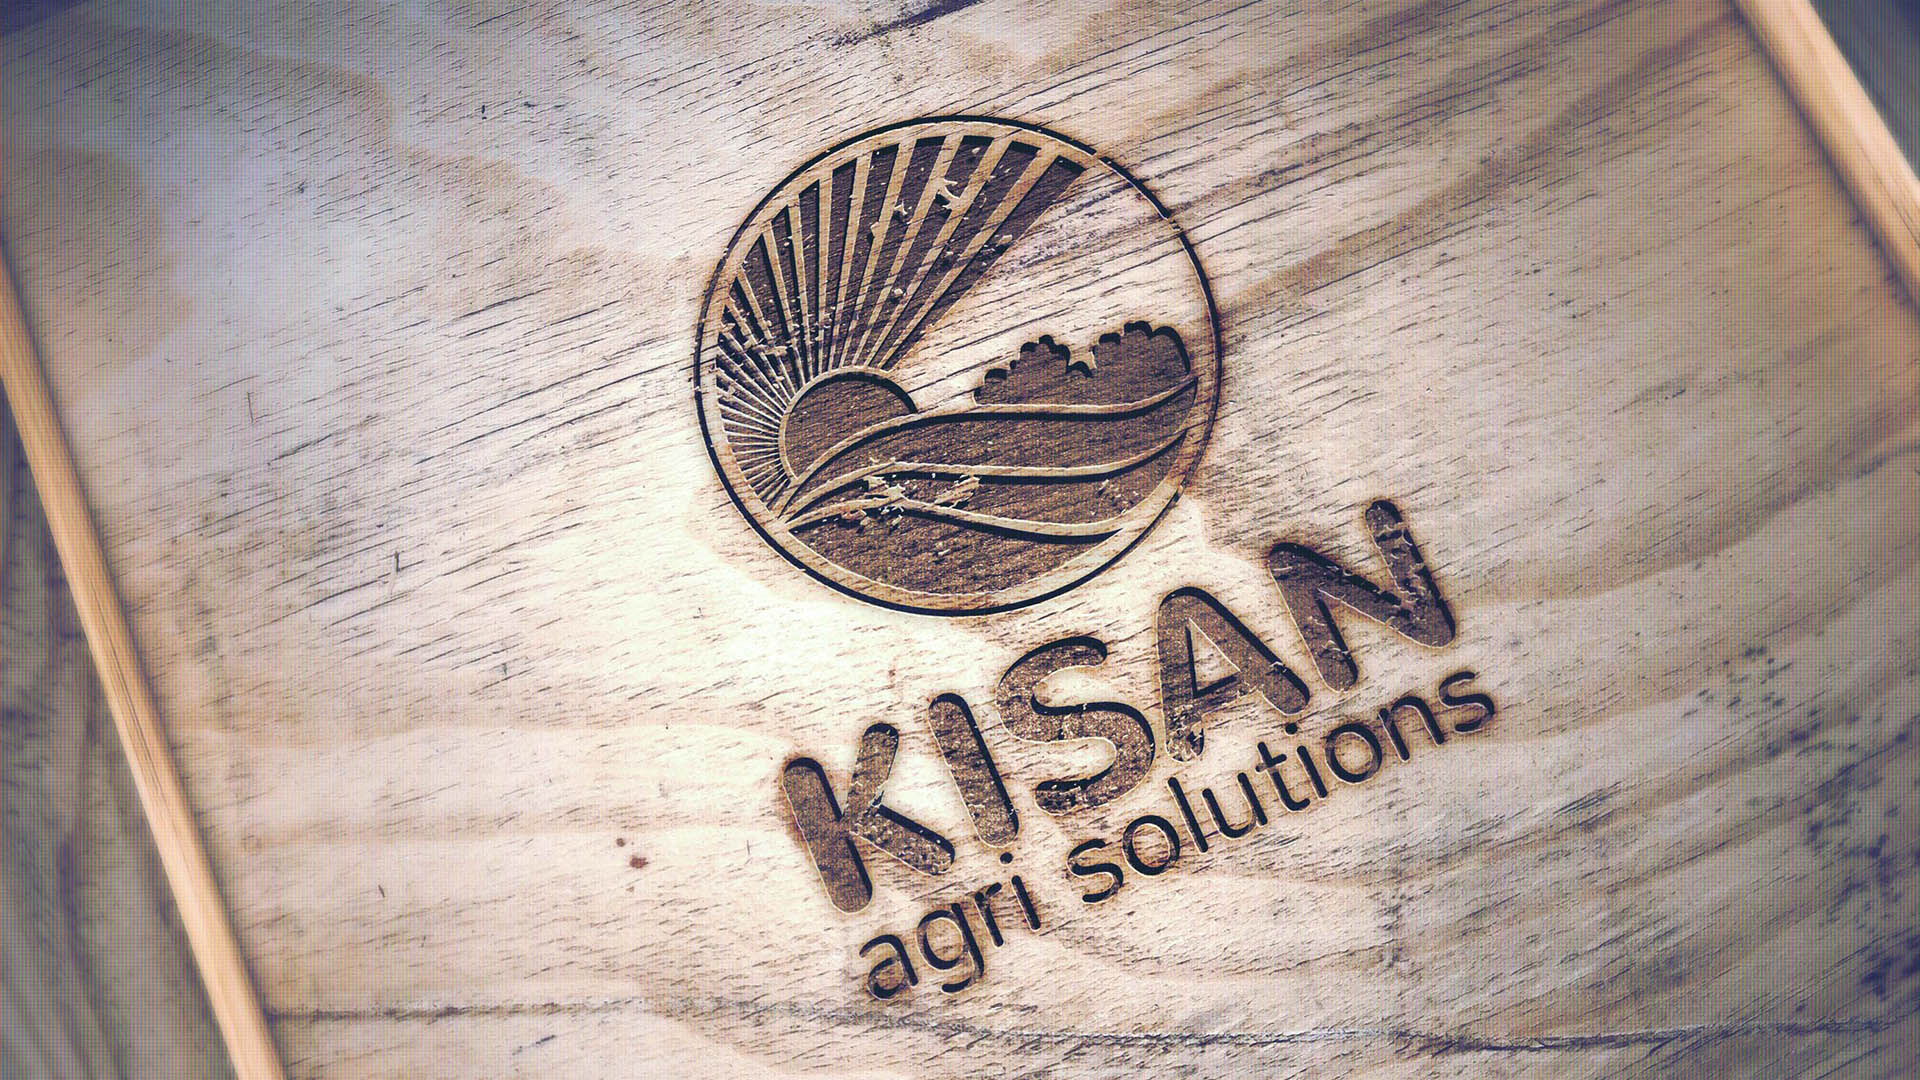 Visual identity for Kisan Agri Solutions a start-up organisation which aims to help small-scale farmers improve their income and living standards